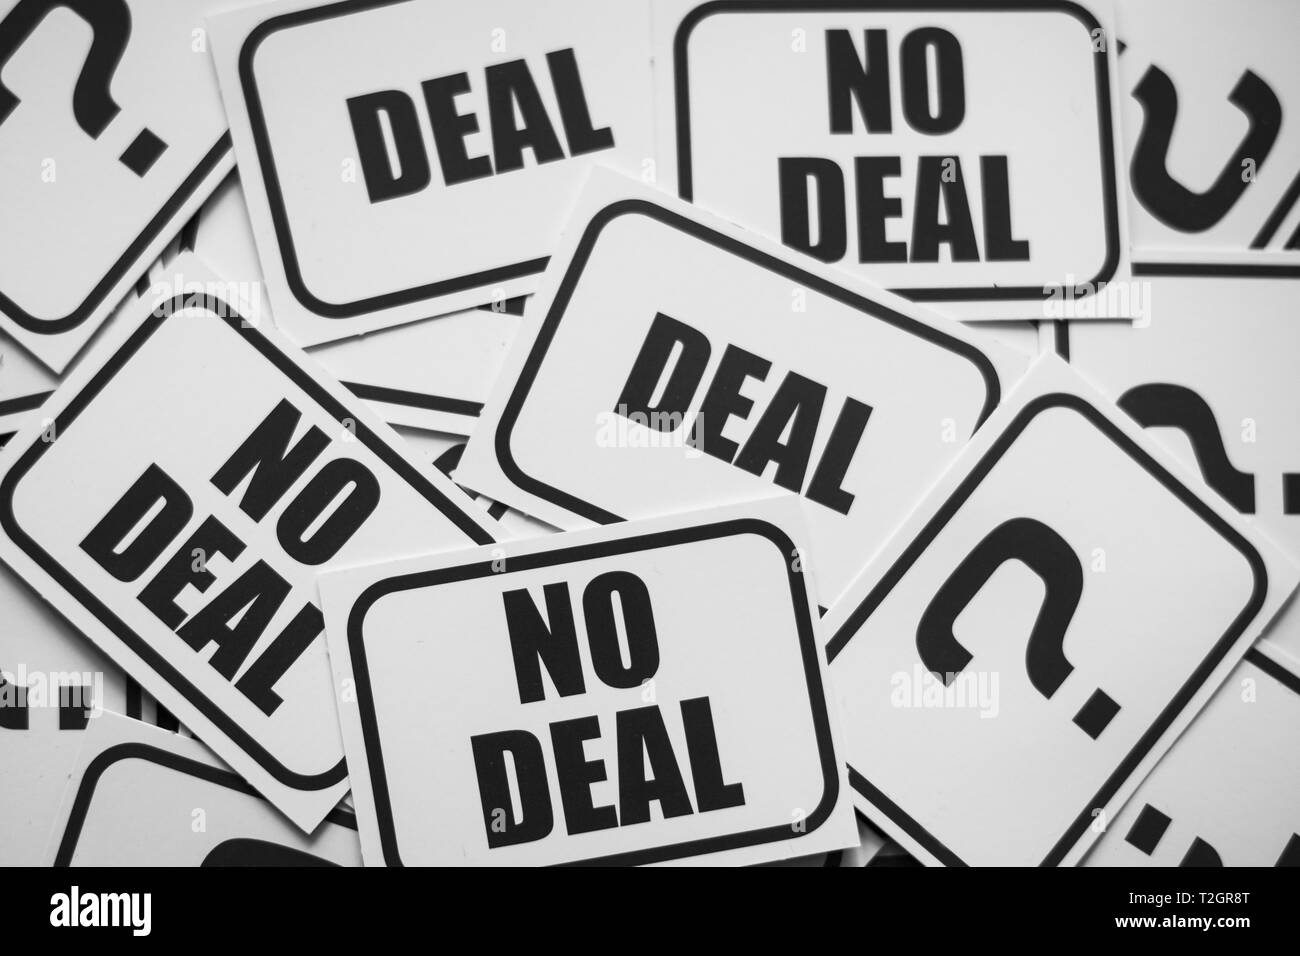 No deal Brexit on the cards. Brexit no deal, exit EU no deal, UK government deciding on Theresa May's brexit withdrawal agreement. Brexit negotiations Stock Photo